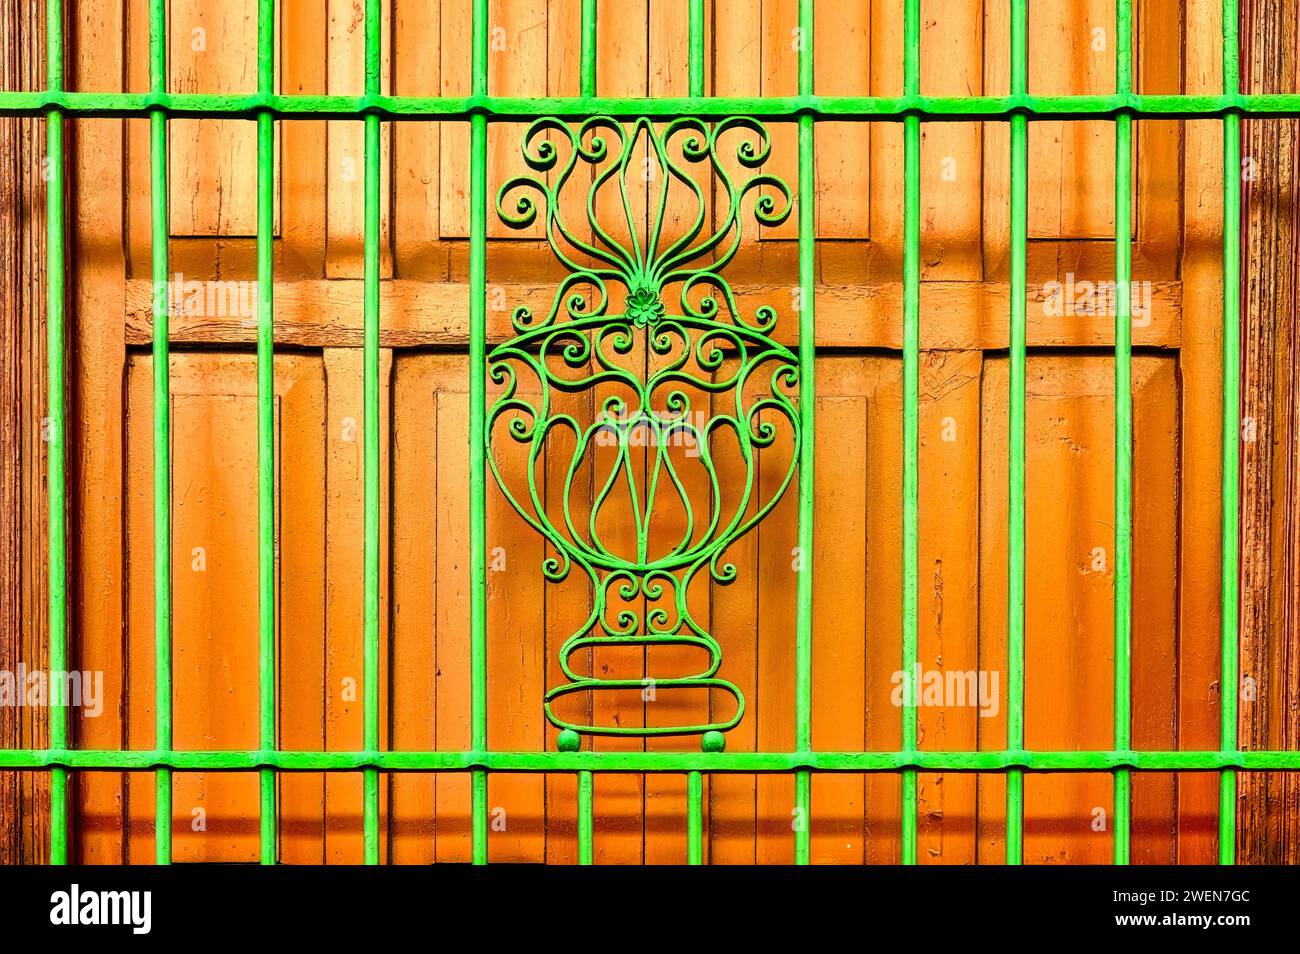 colonial metal grate in building window Stock Photo